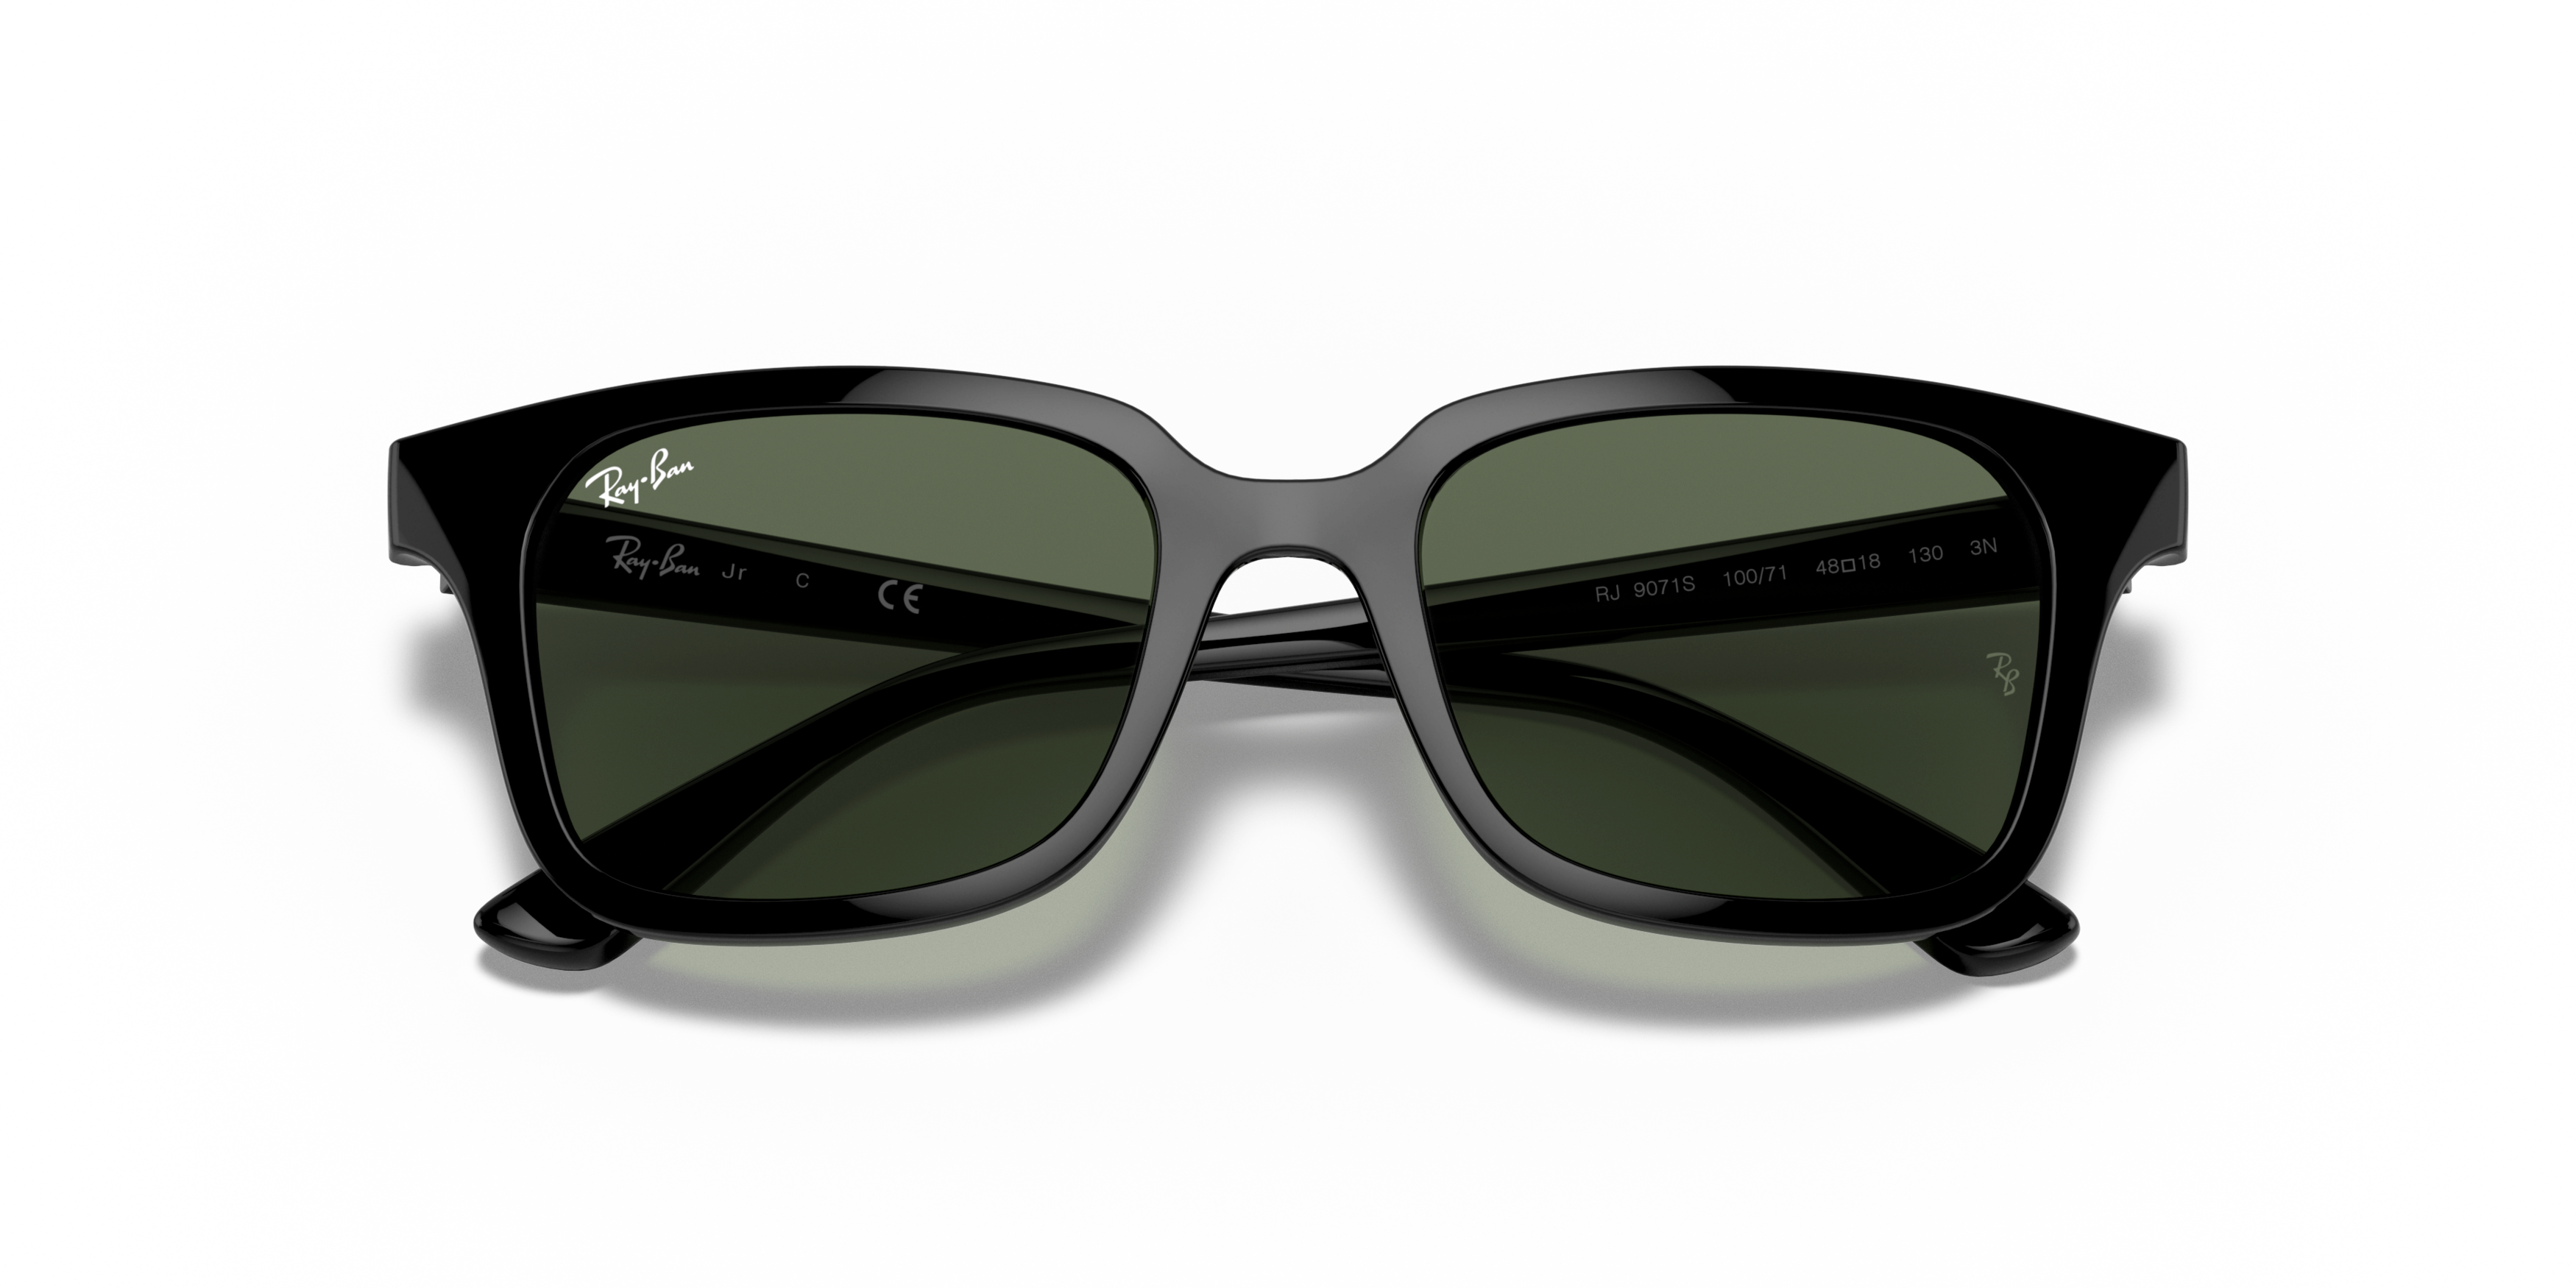 [products.image.folded] RAY-BAN RJ9071S 100/71